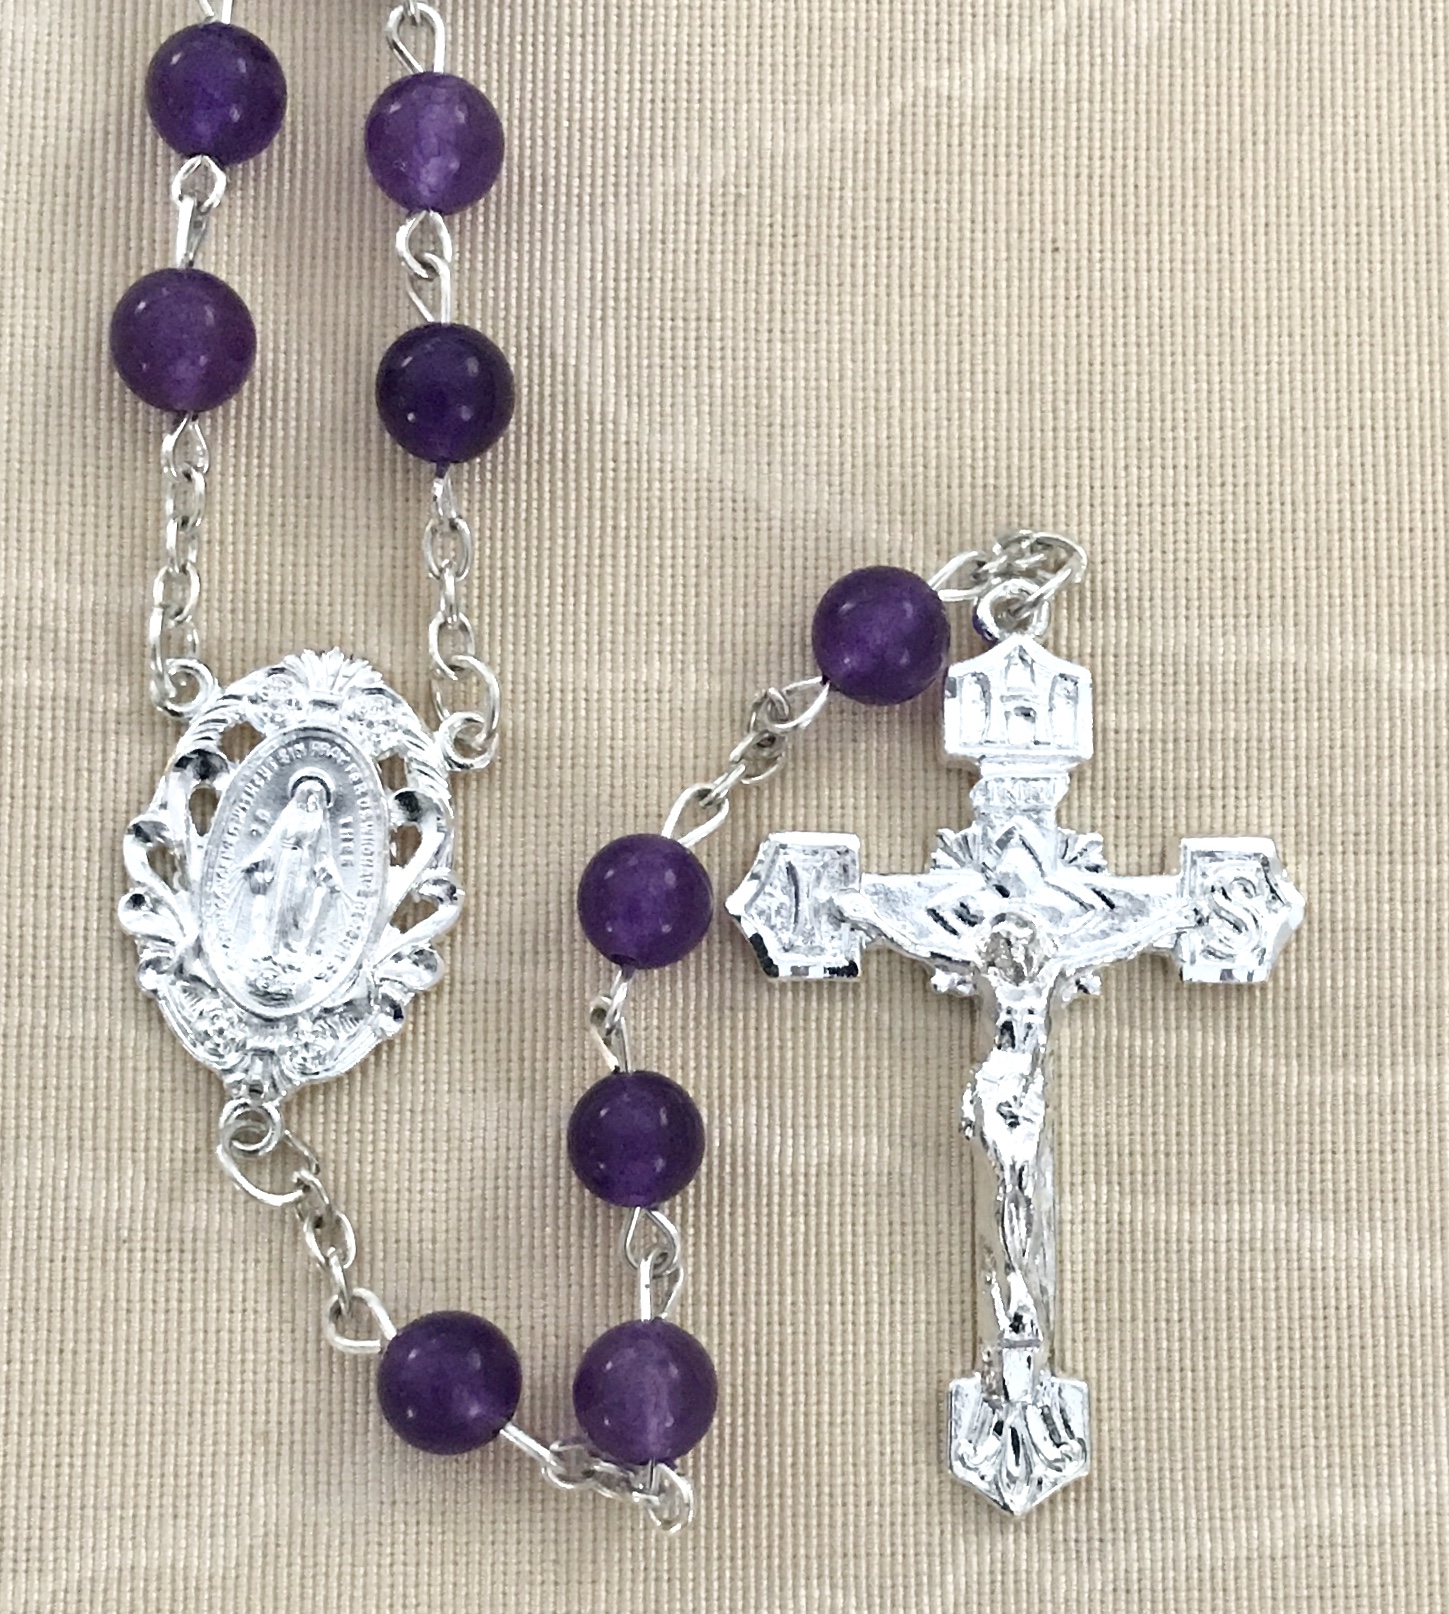 6mm AMETHYST GEMSTONE ROSARY WITH STERLING SILVER PLATED CRUCIFIX AND CENTER GIFT BOXED